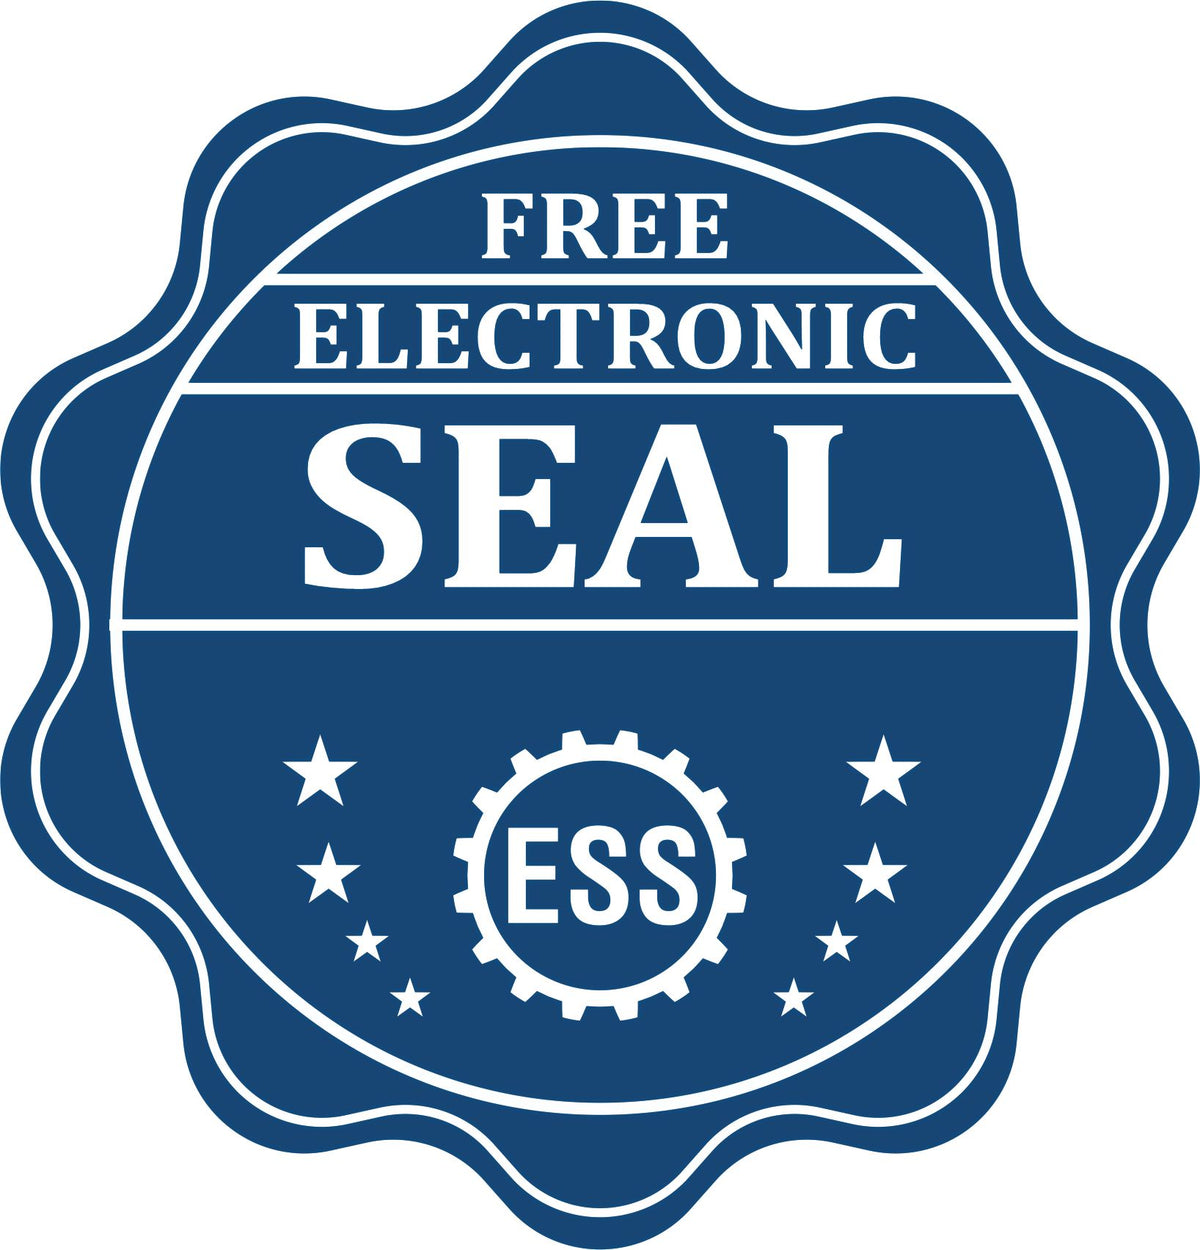 A badge showing a free electronic seal for the Heavy Duty Cast Iron West Virginia Engineer Seal Embosser with stars and the ESS gear on the emblem.